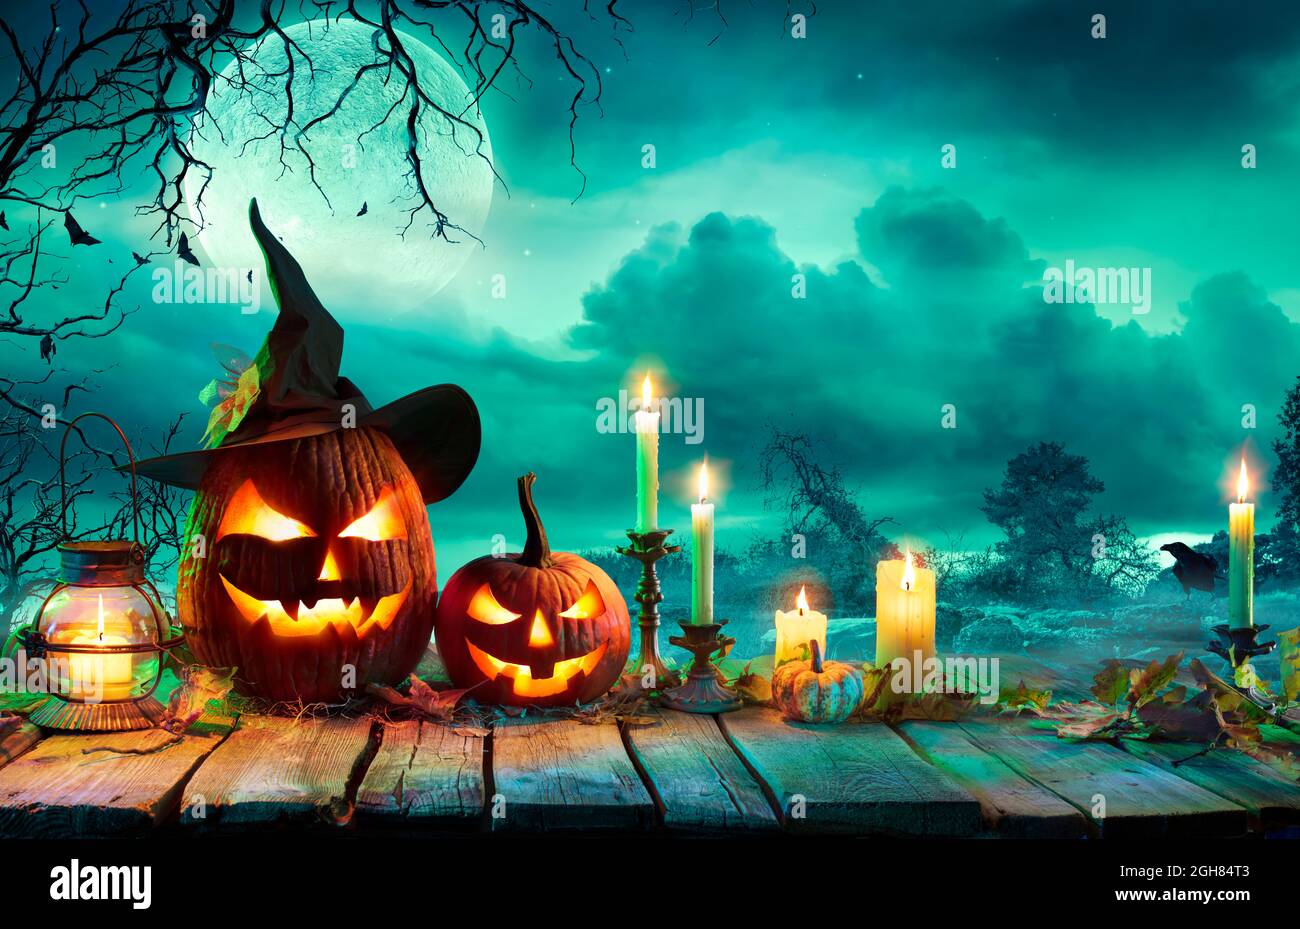 Halloween At Night - Pumpkins With Witch Hat And Candles On Table In Mystery Landscape Stock Photo